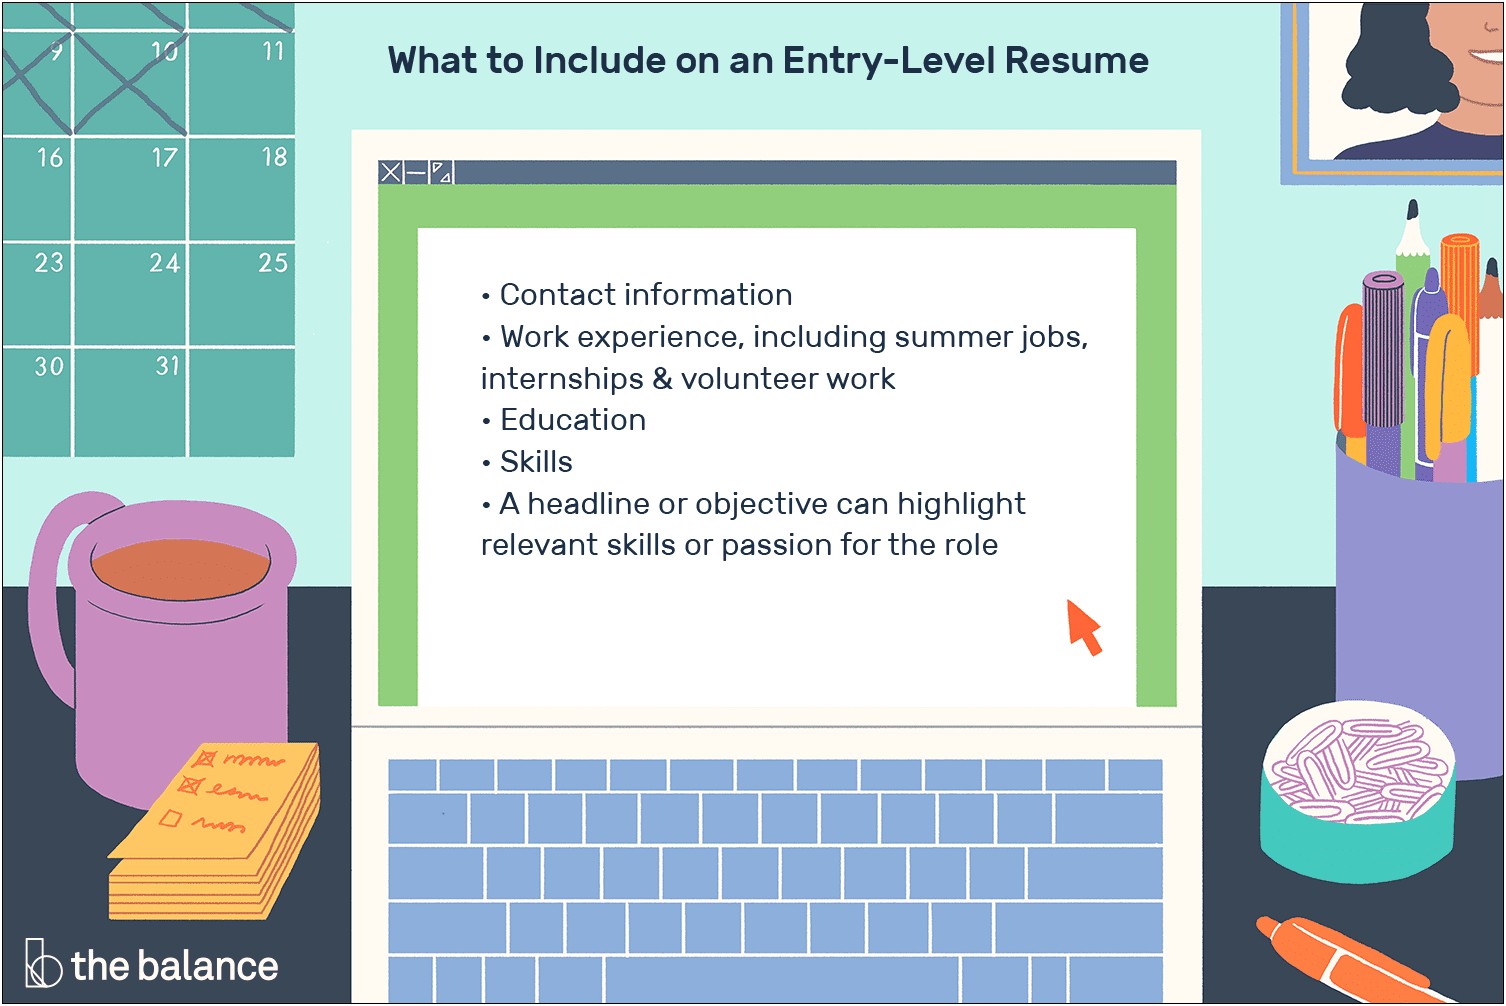 Office Job Resume Skills Examples For The Inexperienced